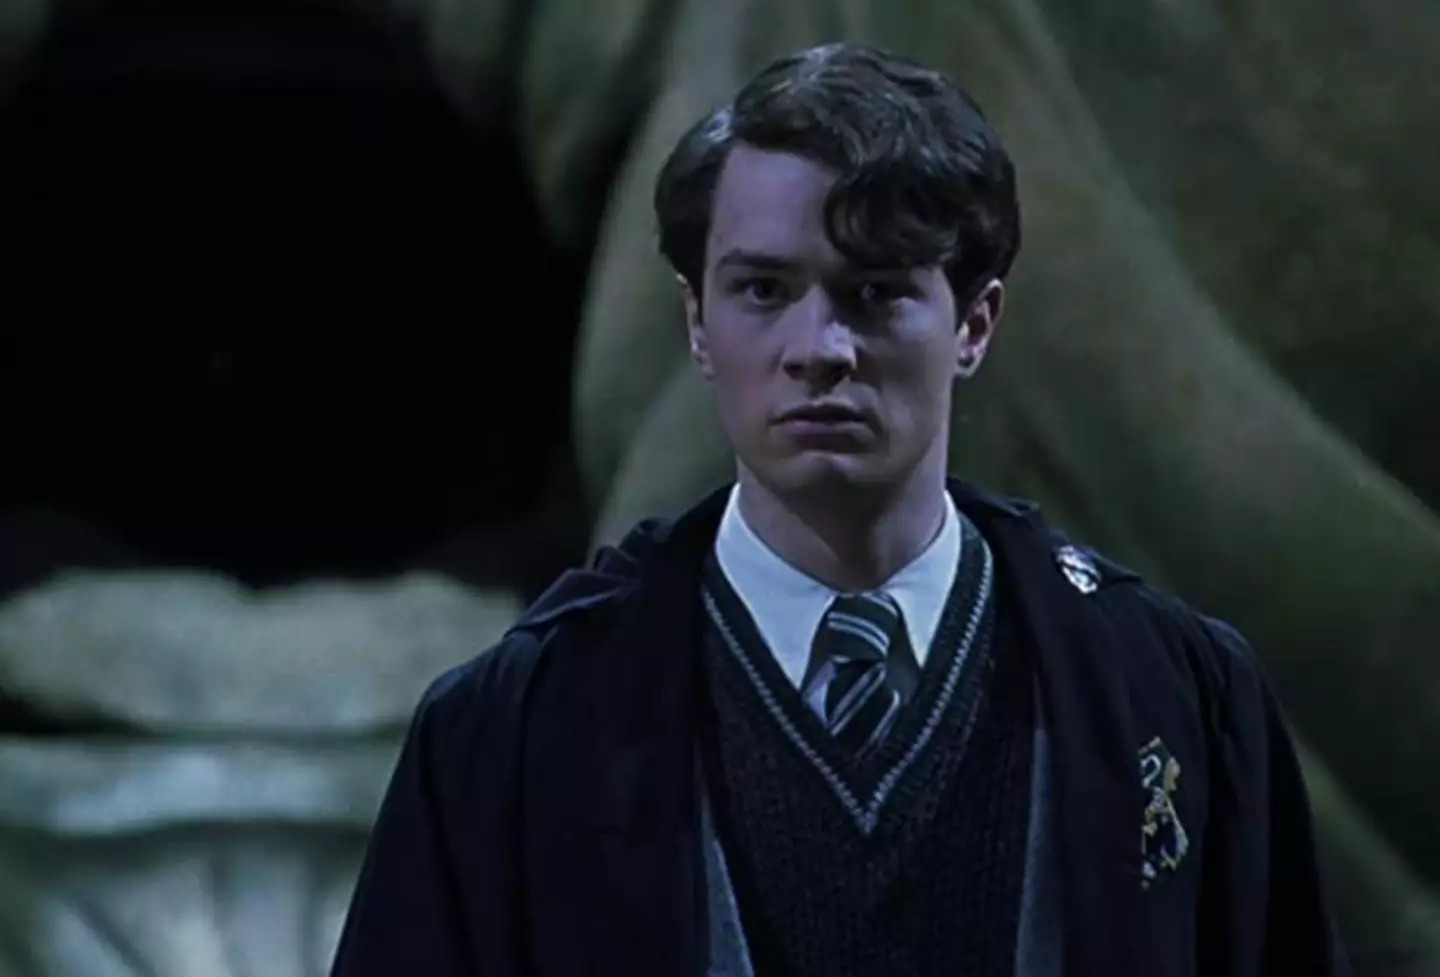 Christian Coulson was the first teenage Voldemort a.k.a. Tom Riddle.